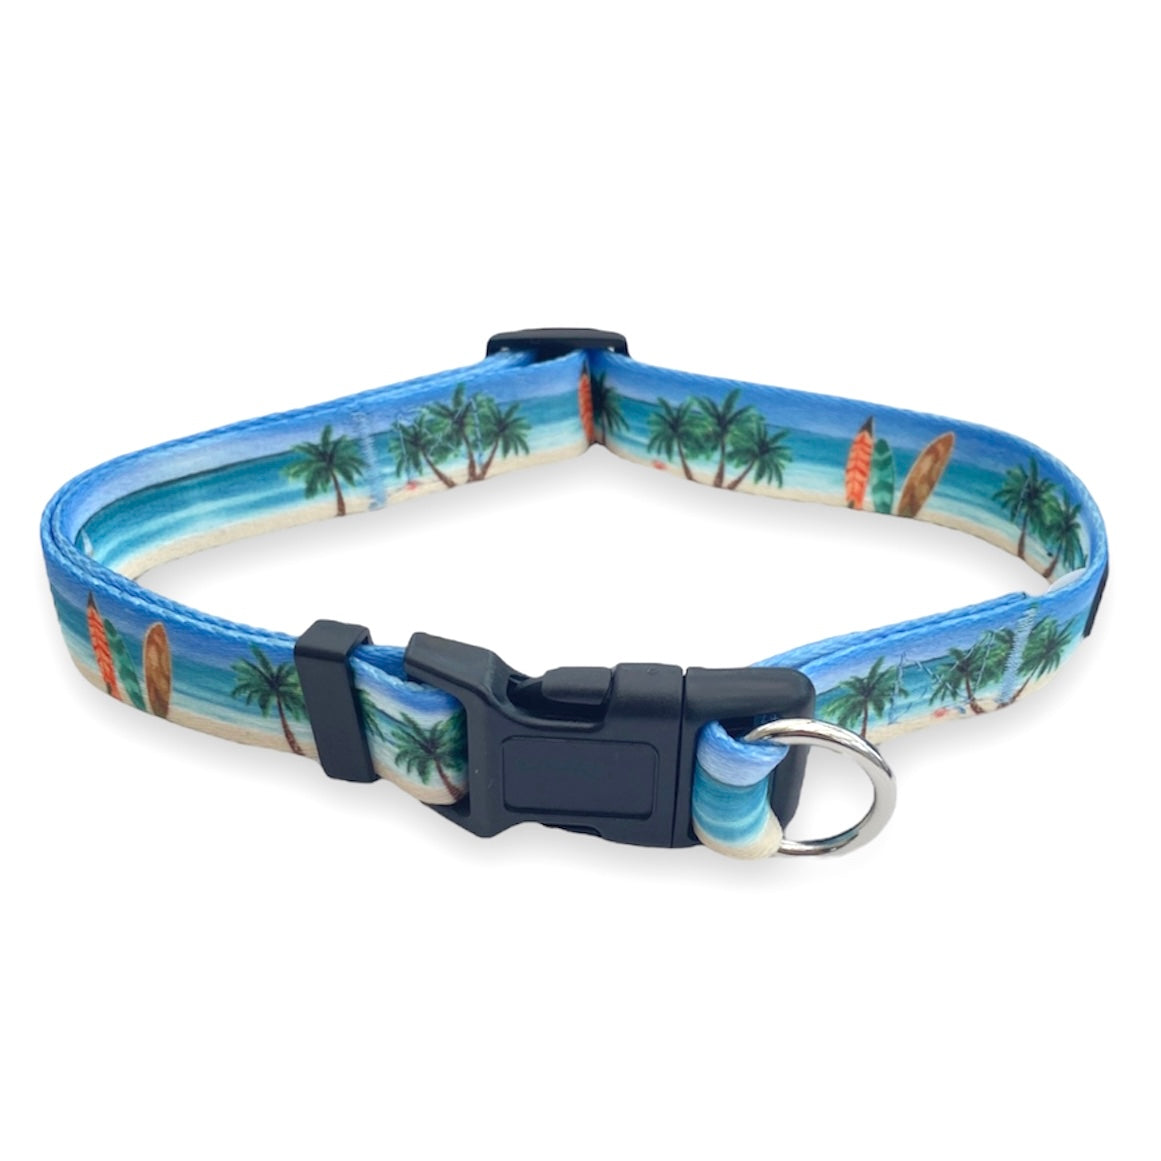 a photo of a beach themed dog collar from fearless pet the collar is a safe cinch no escape collar